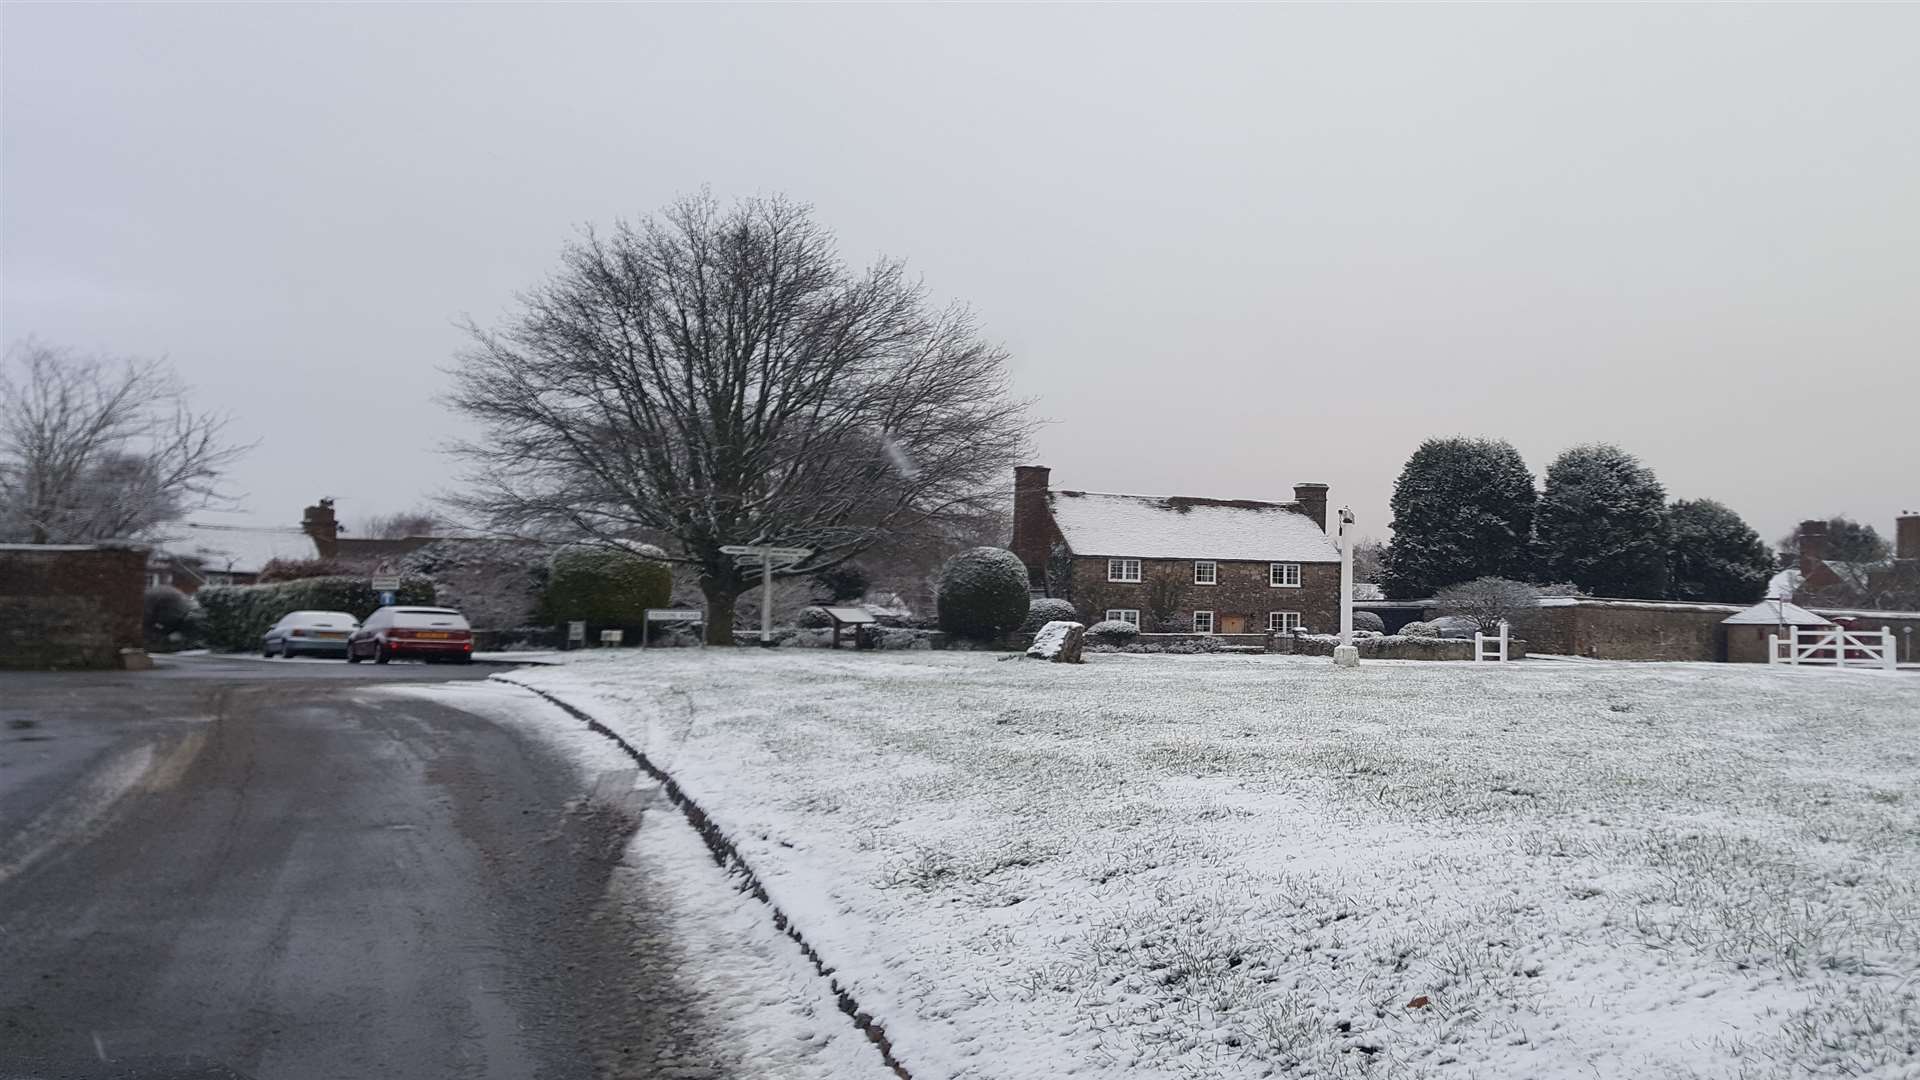 Another wintry picture of Offham